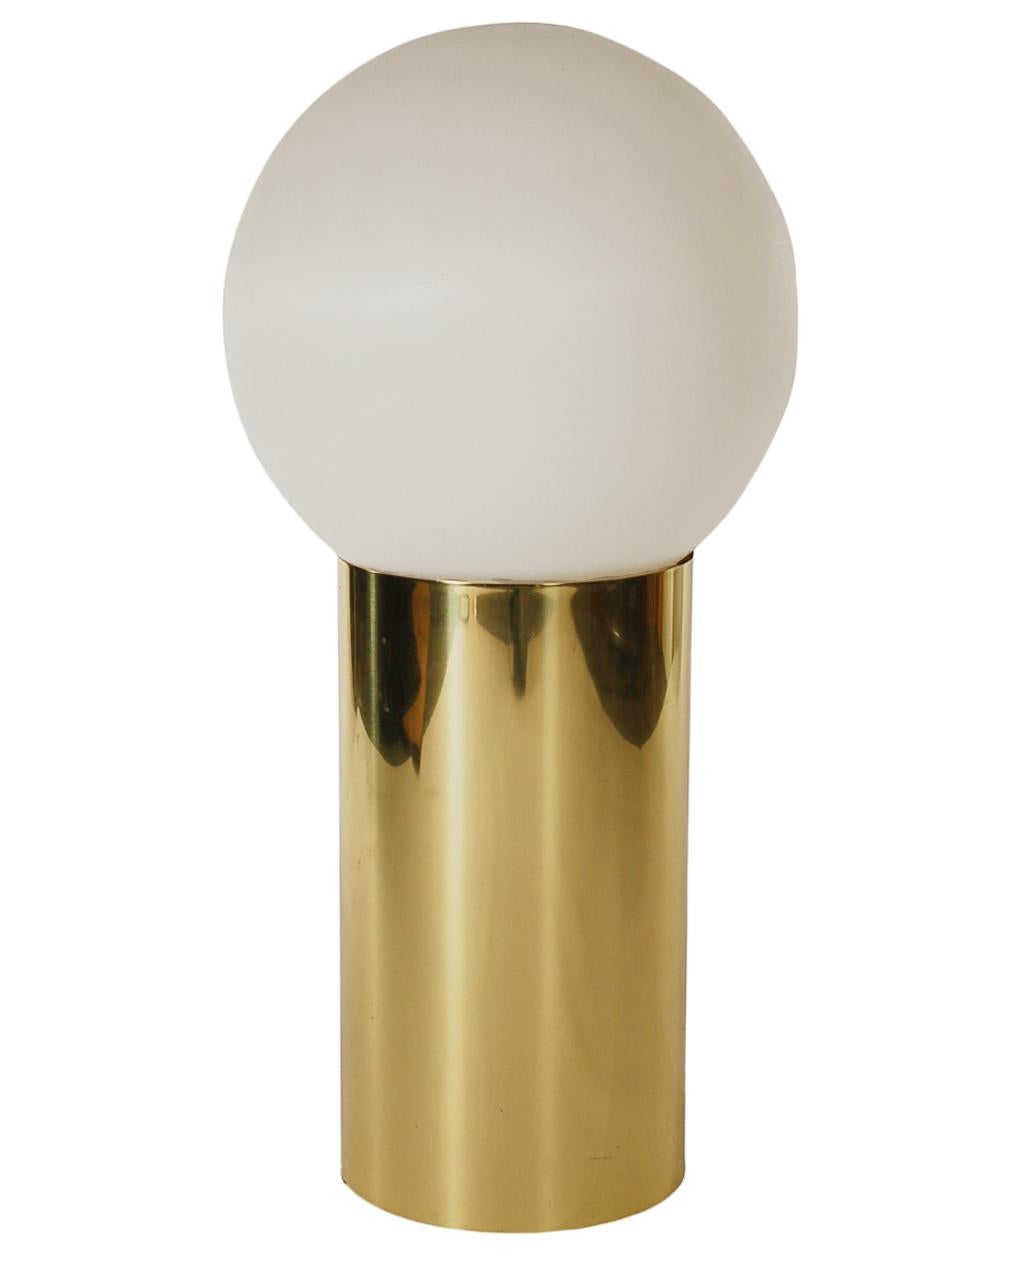 American Large Mid-Century Modern Brass Cylindrical Ball Table or Floor Lamp For Sale